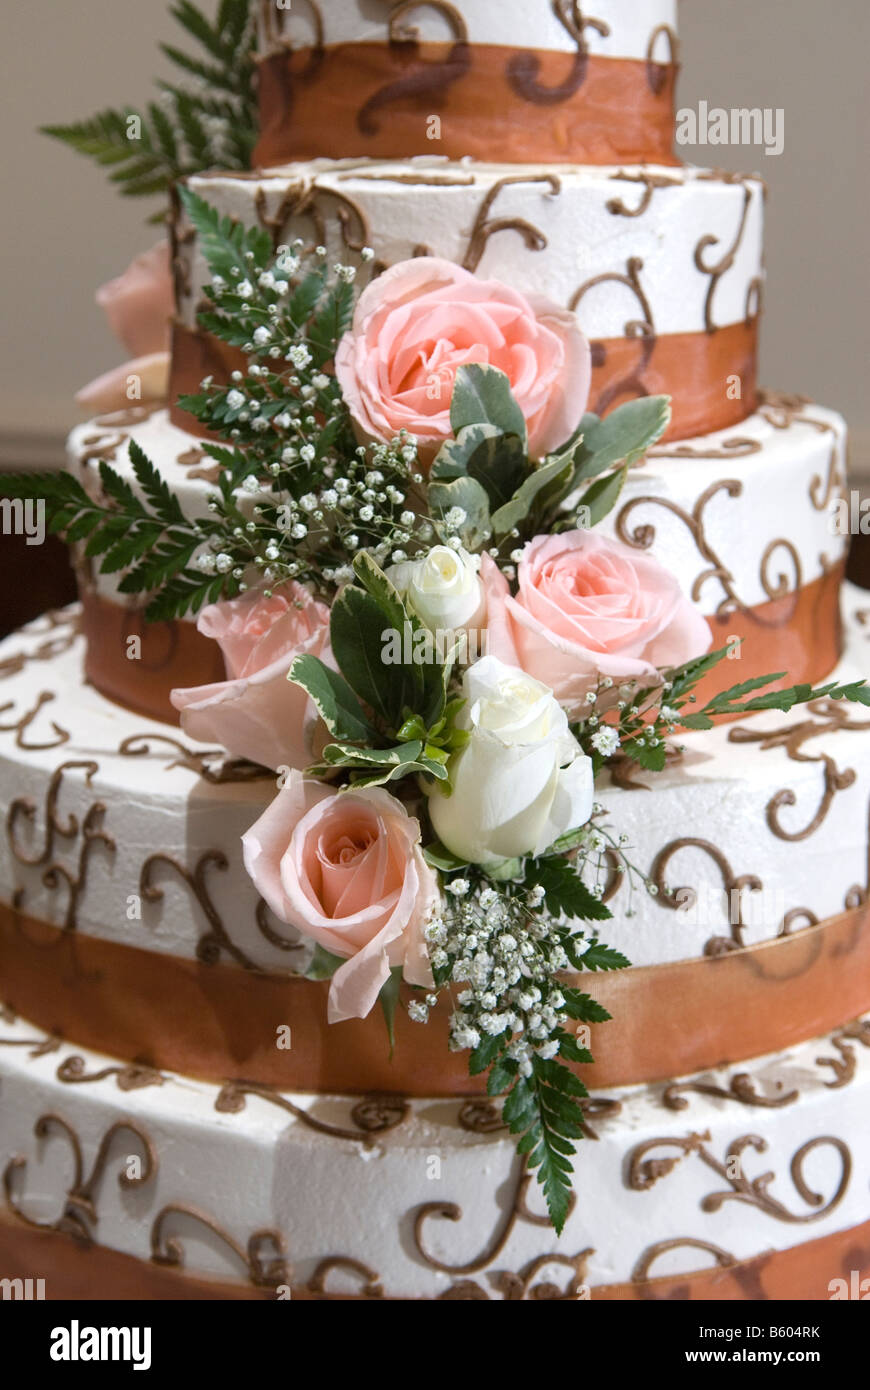 5 Tier Cakes Archives - Opulence Bakery